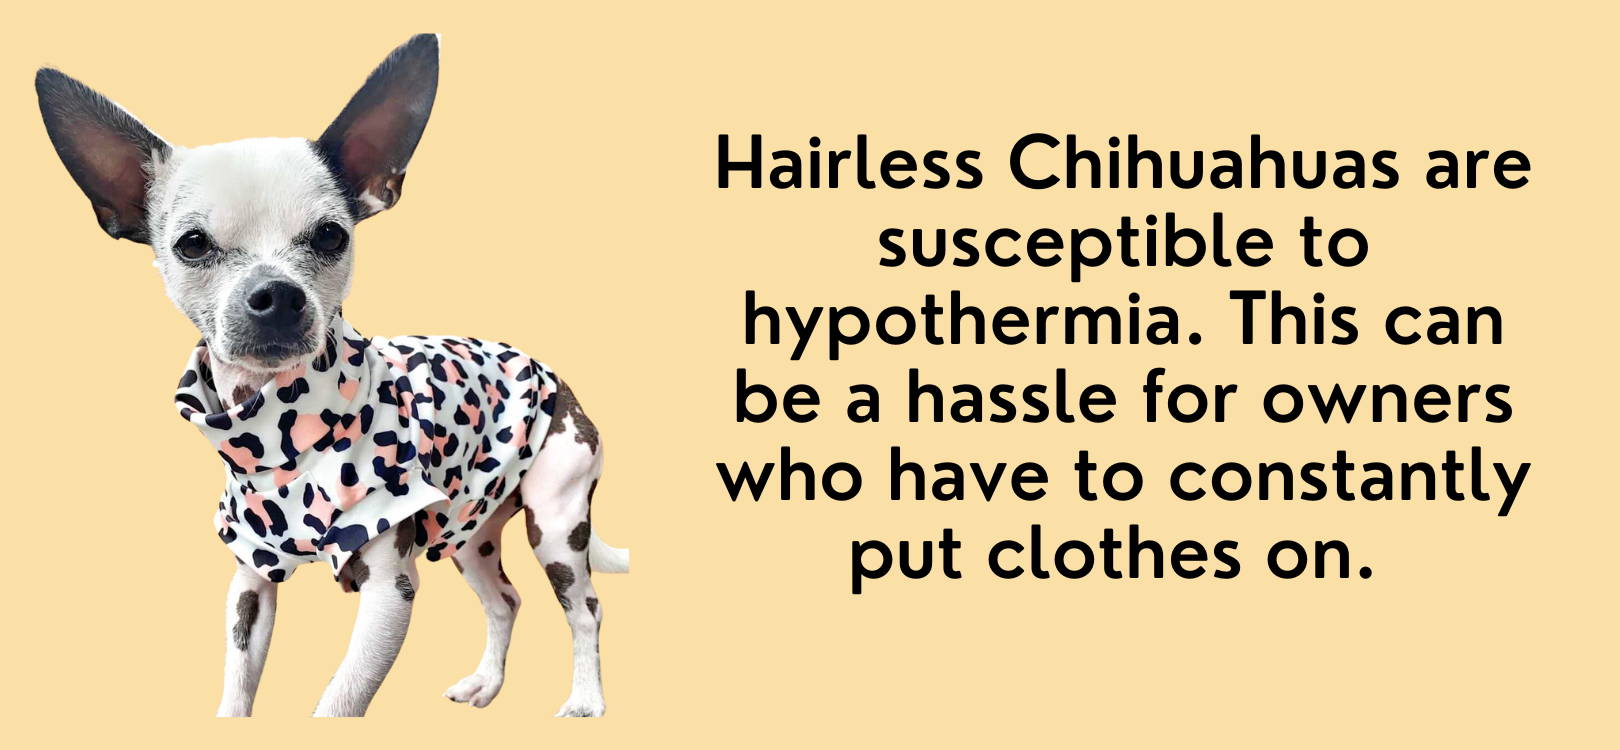 hairless chihuahuas are always cold